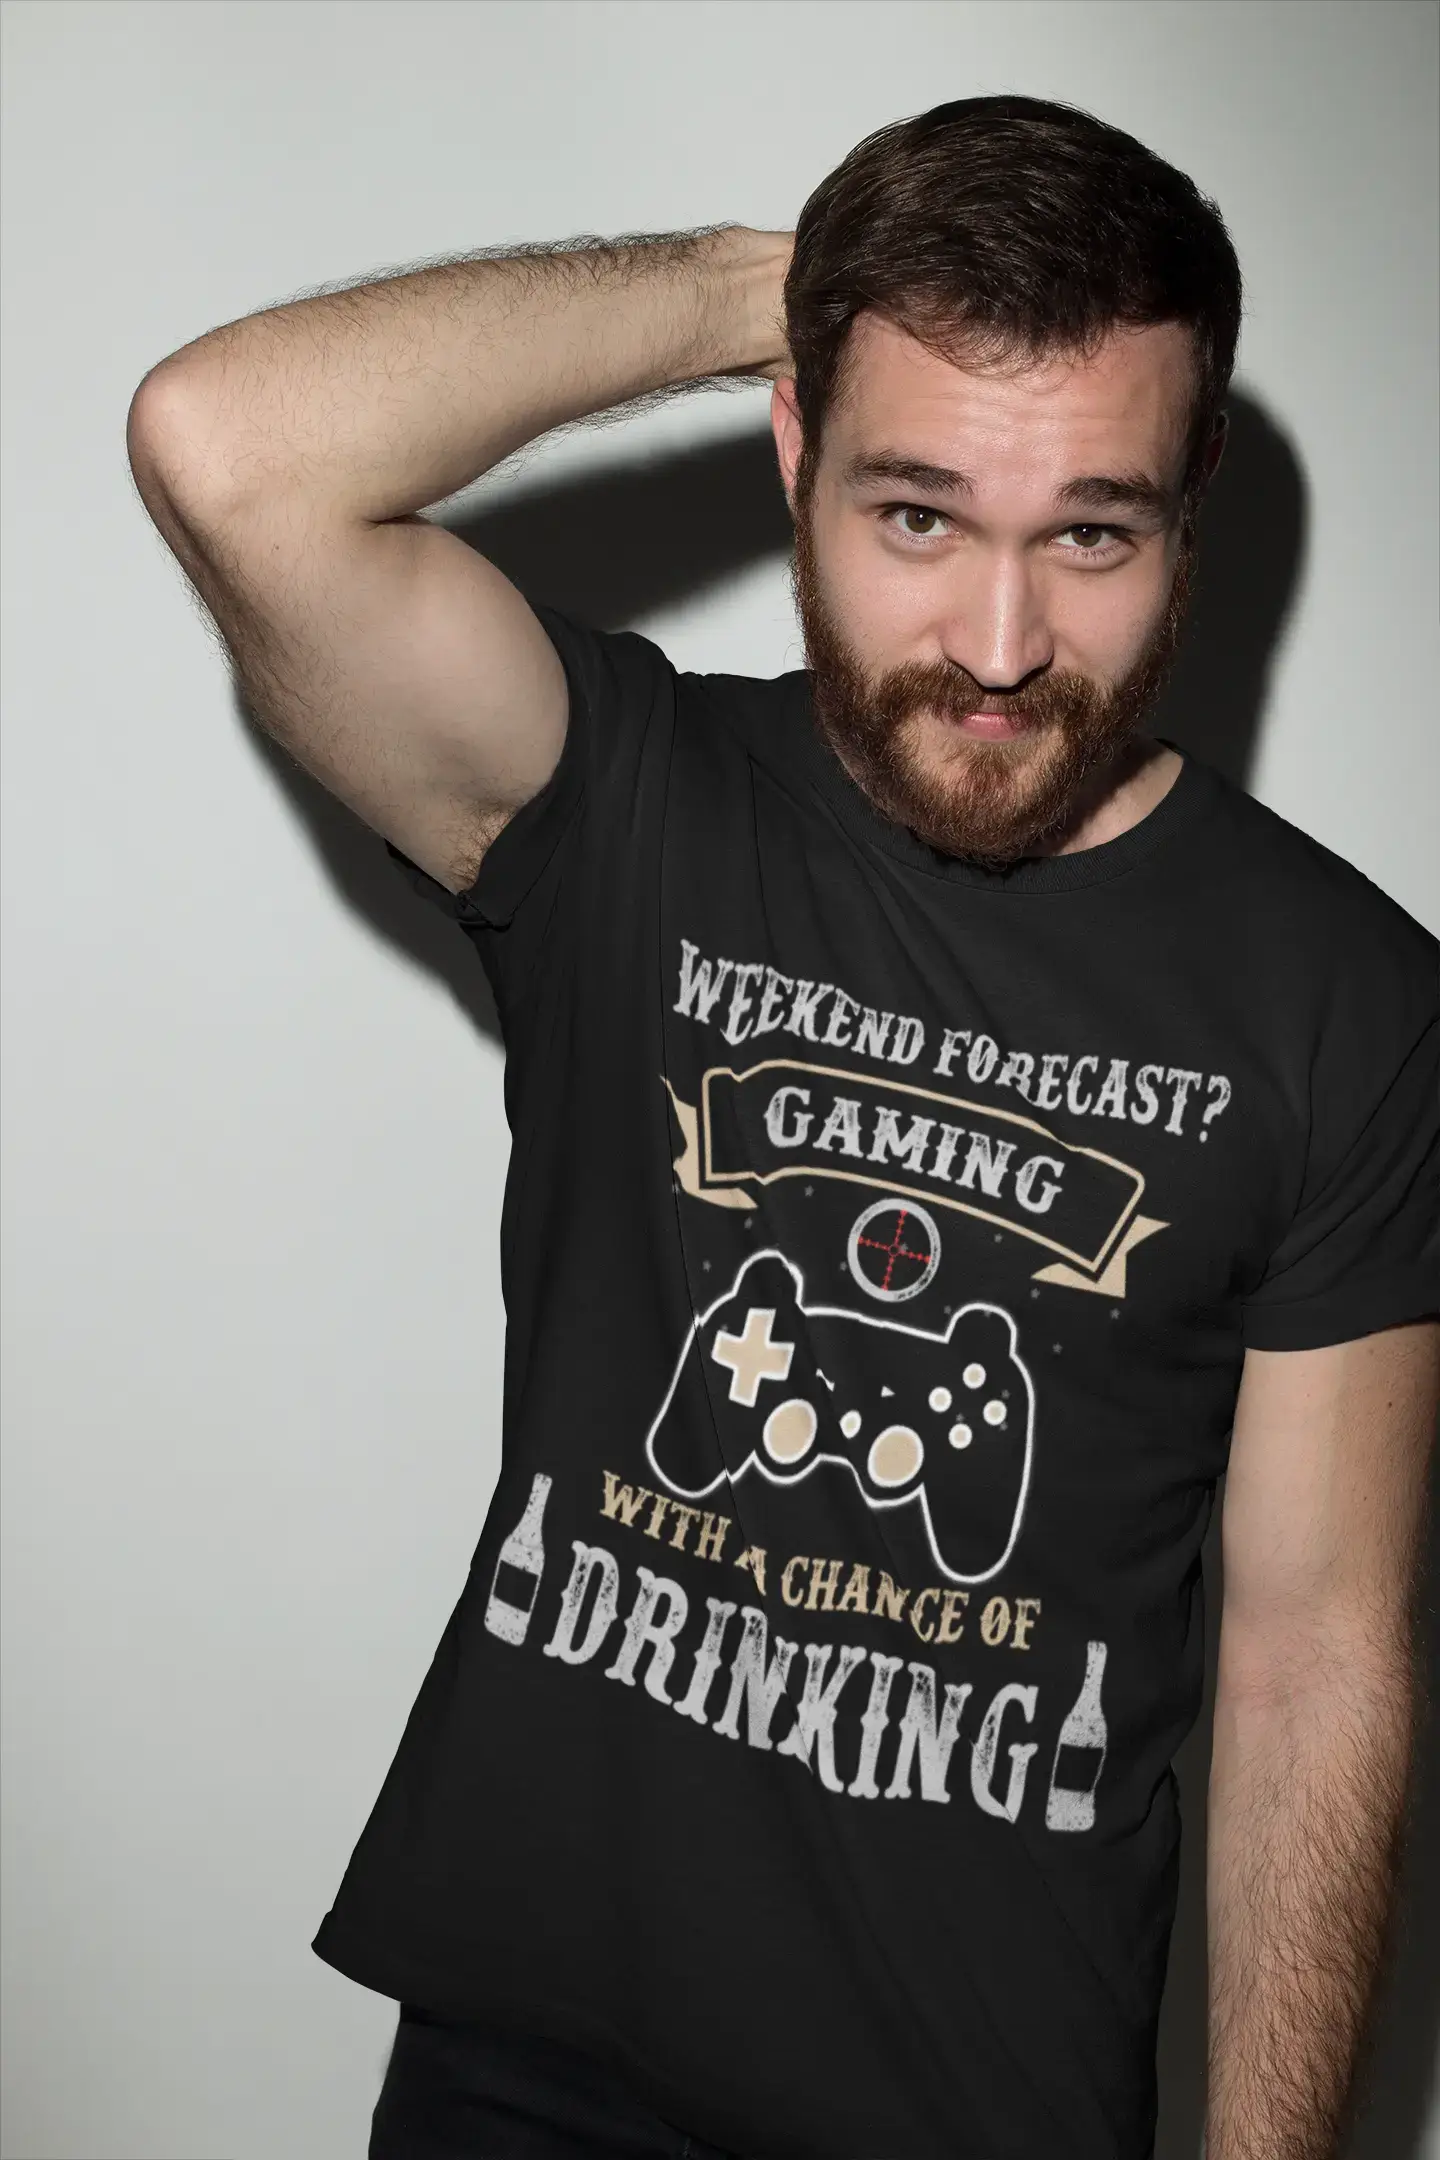 ULTRABASIC Men's T-Shirt Gaming With a Chance of Drinking - Funny Gaming Shirt for Adults